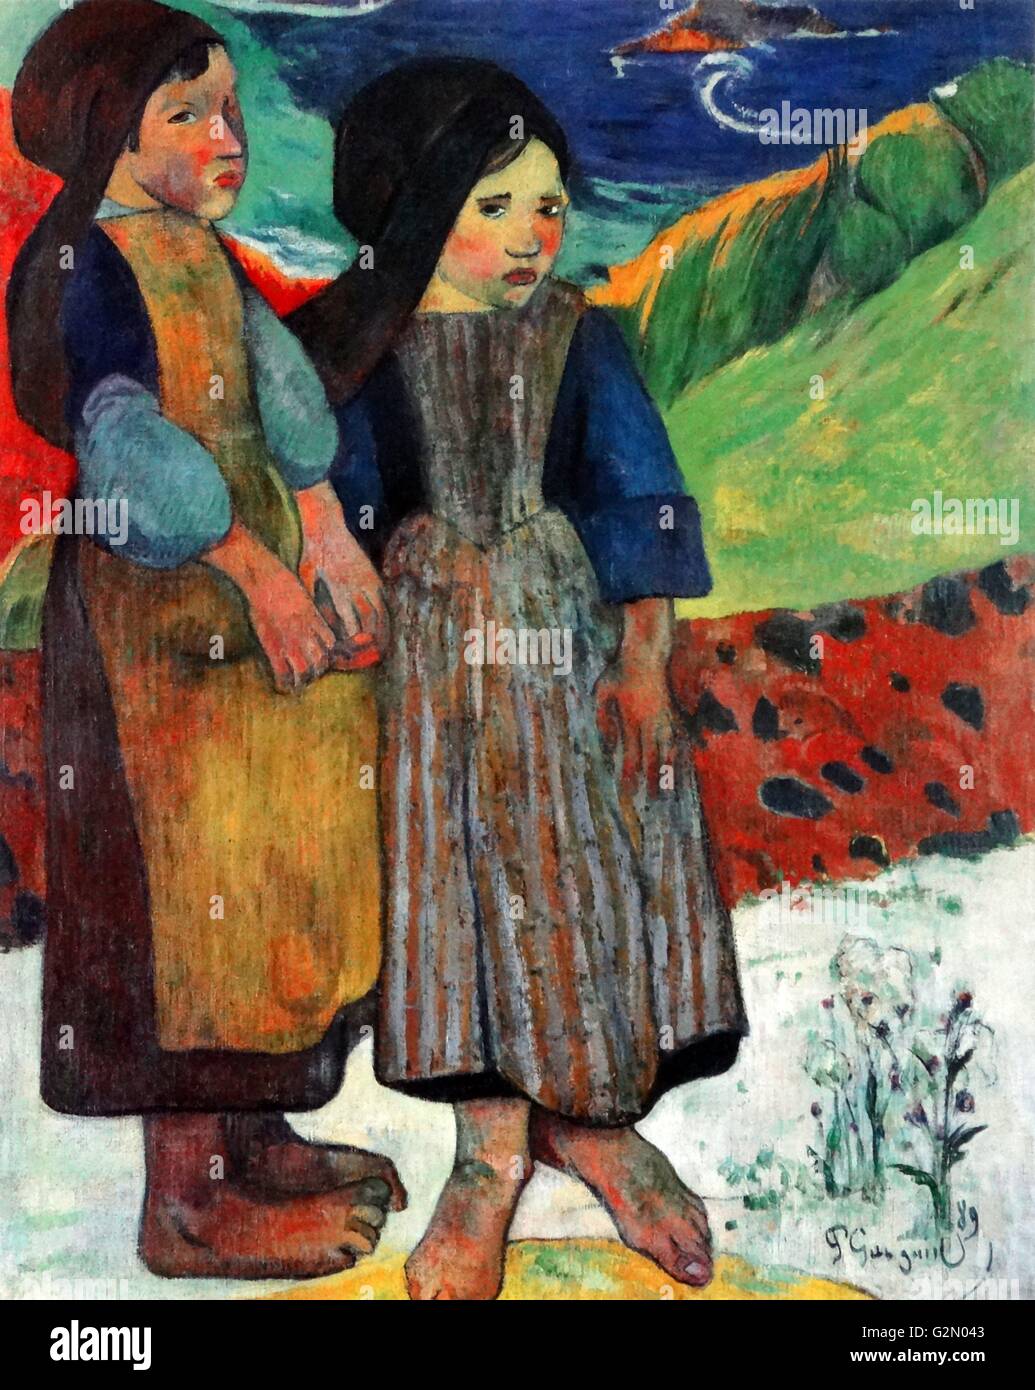 Oil on canvas painting by the French artist Paul Gauguin (7th June 1848 - 8th May 1903) work titled 'Two breton girls by the sea'. Completed in 1889. Stock Photo